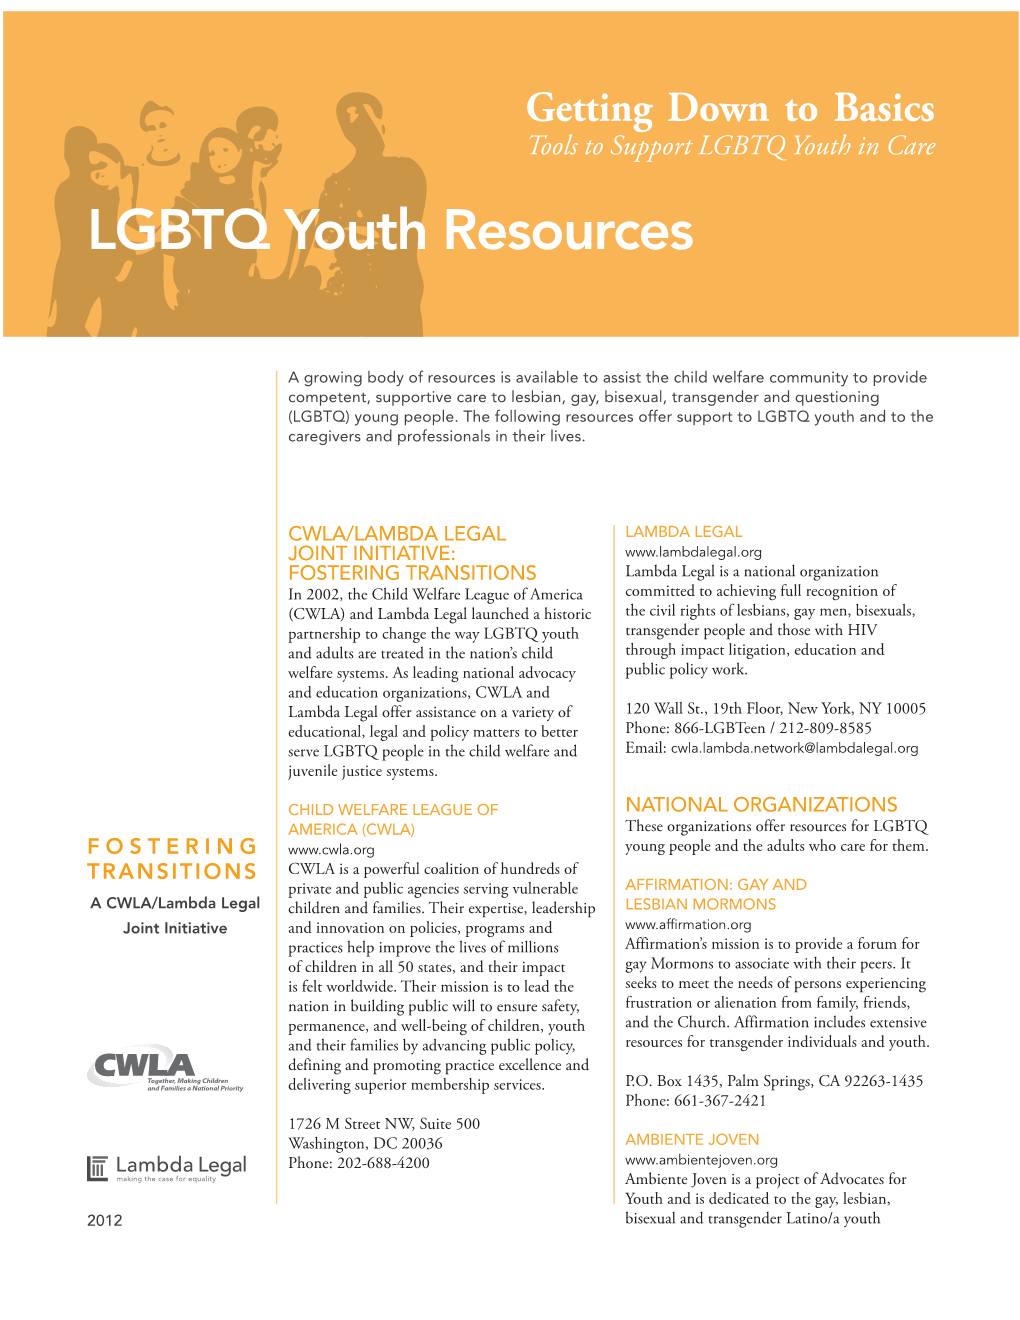 LGBTQ Youth Resources